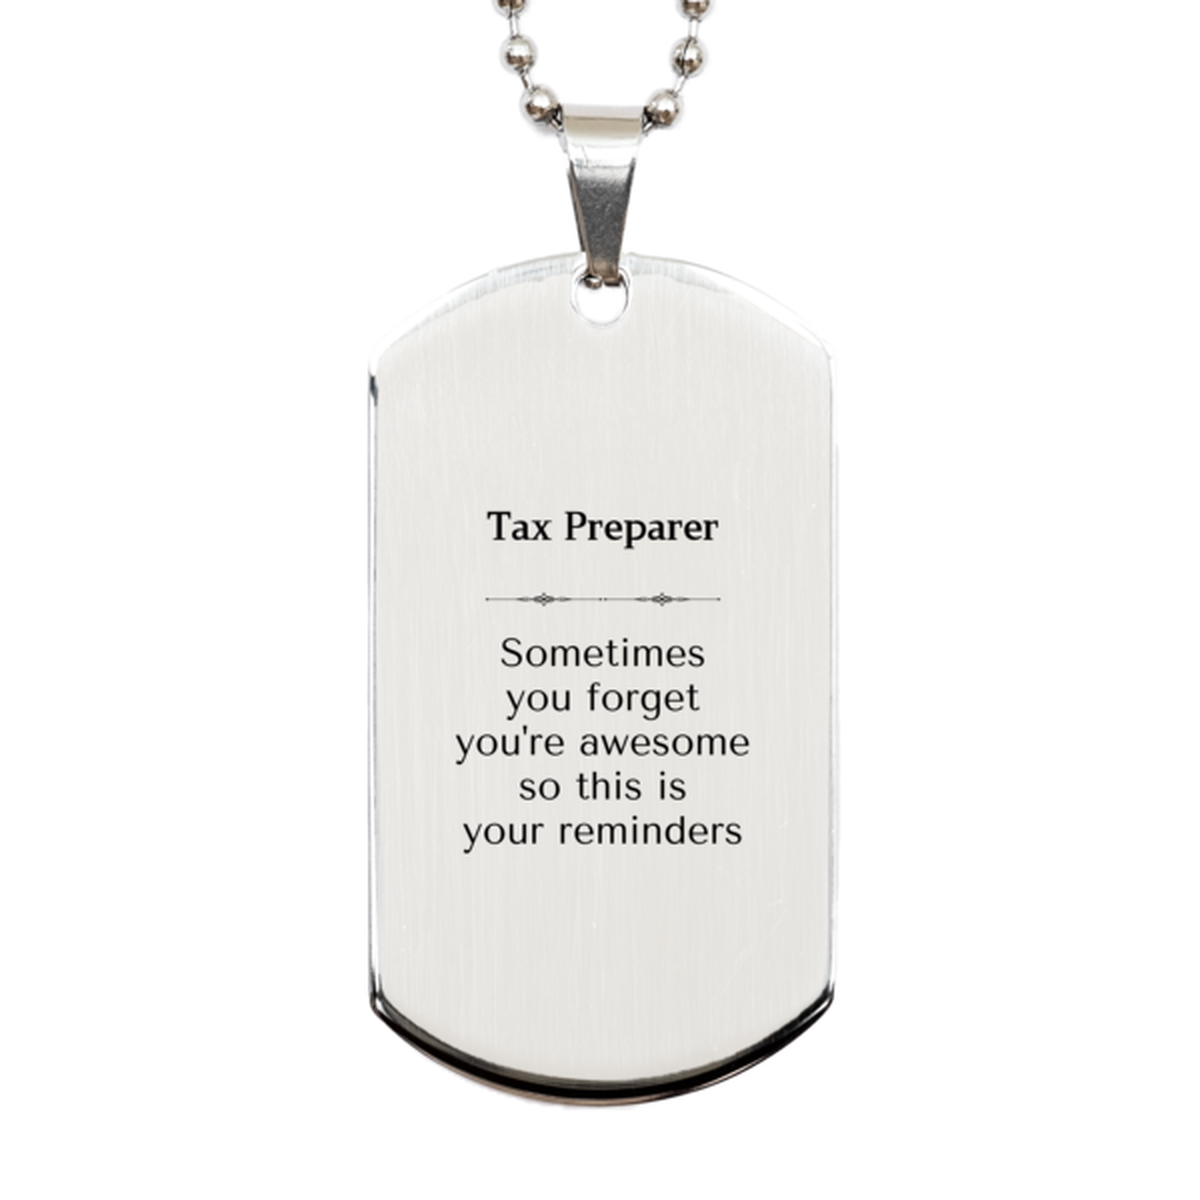 Sentimental Tax Preparer Silver Dog Tag, Tax Preparer Sometimes you forget you're awesome so this is your reminders, Graduation Christmas Birthday Gifts for Tax Preparer, Men, Women, Coworkers